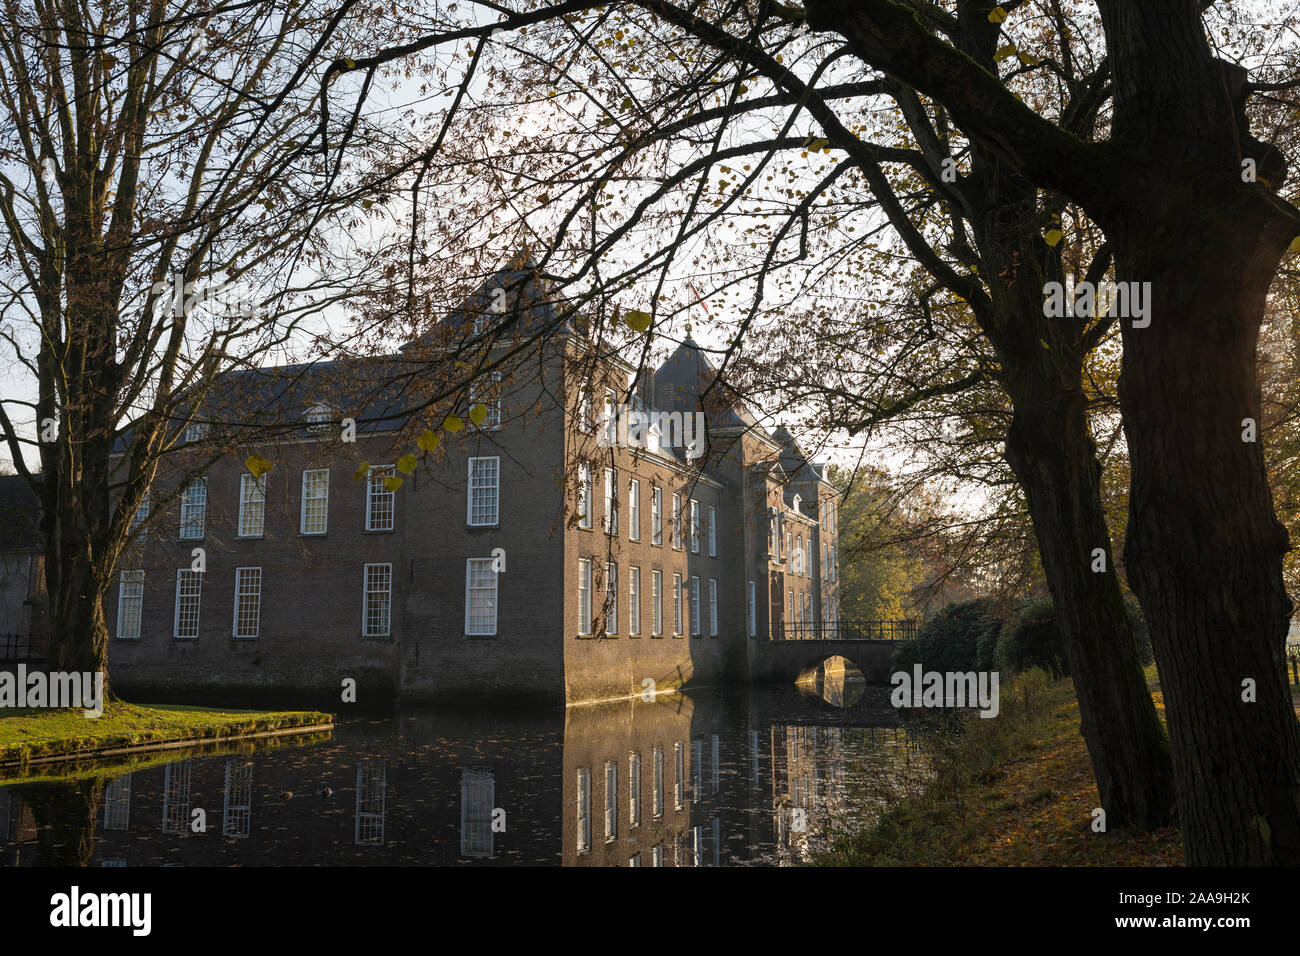 View at the castle of Heeze in autumn, trees and a canal in front, Netherlands Stock Photo